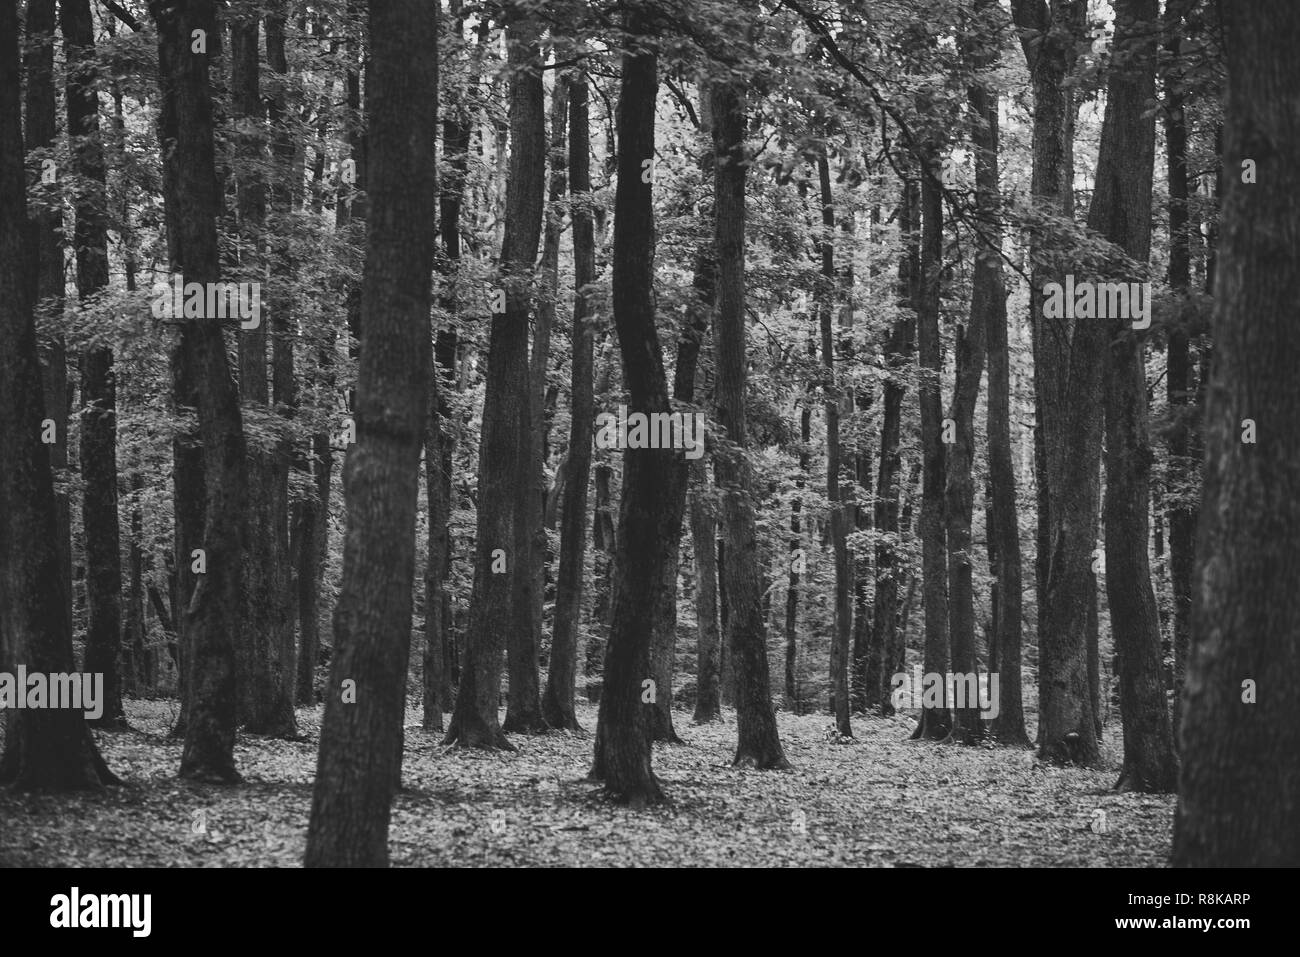 Old tall trees with moss in forest. Stock Photo